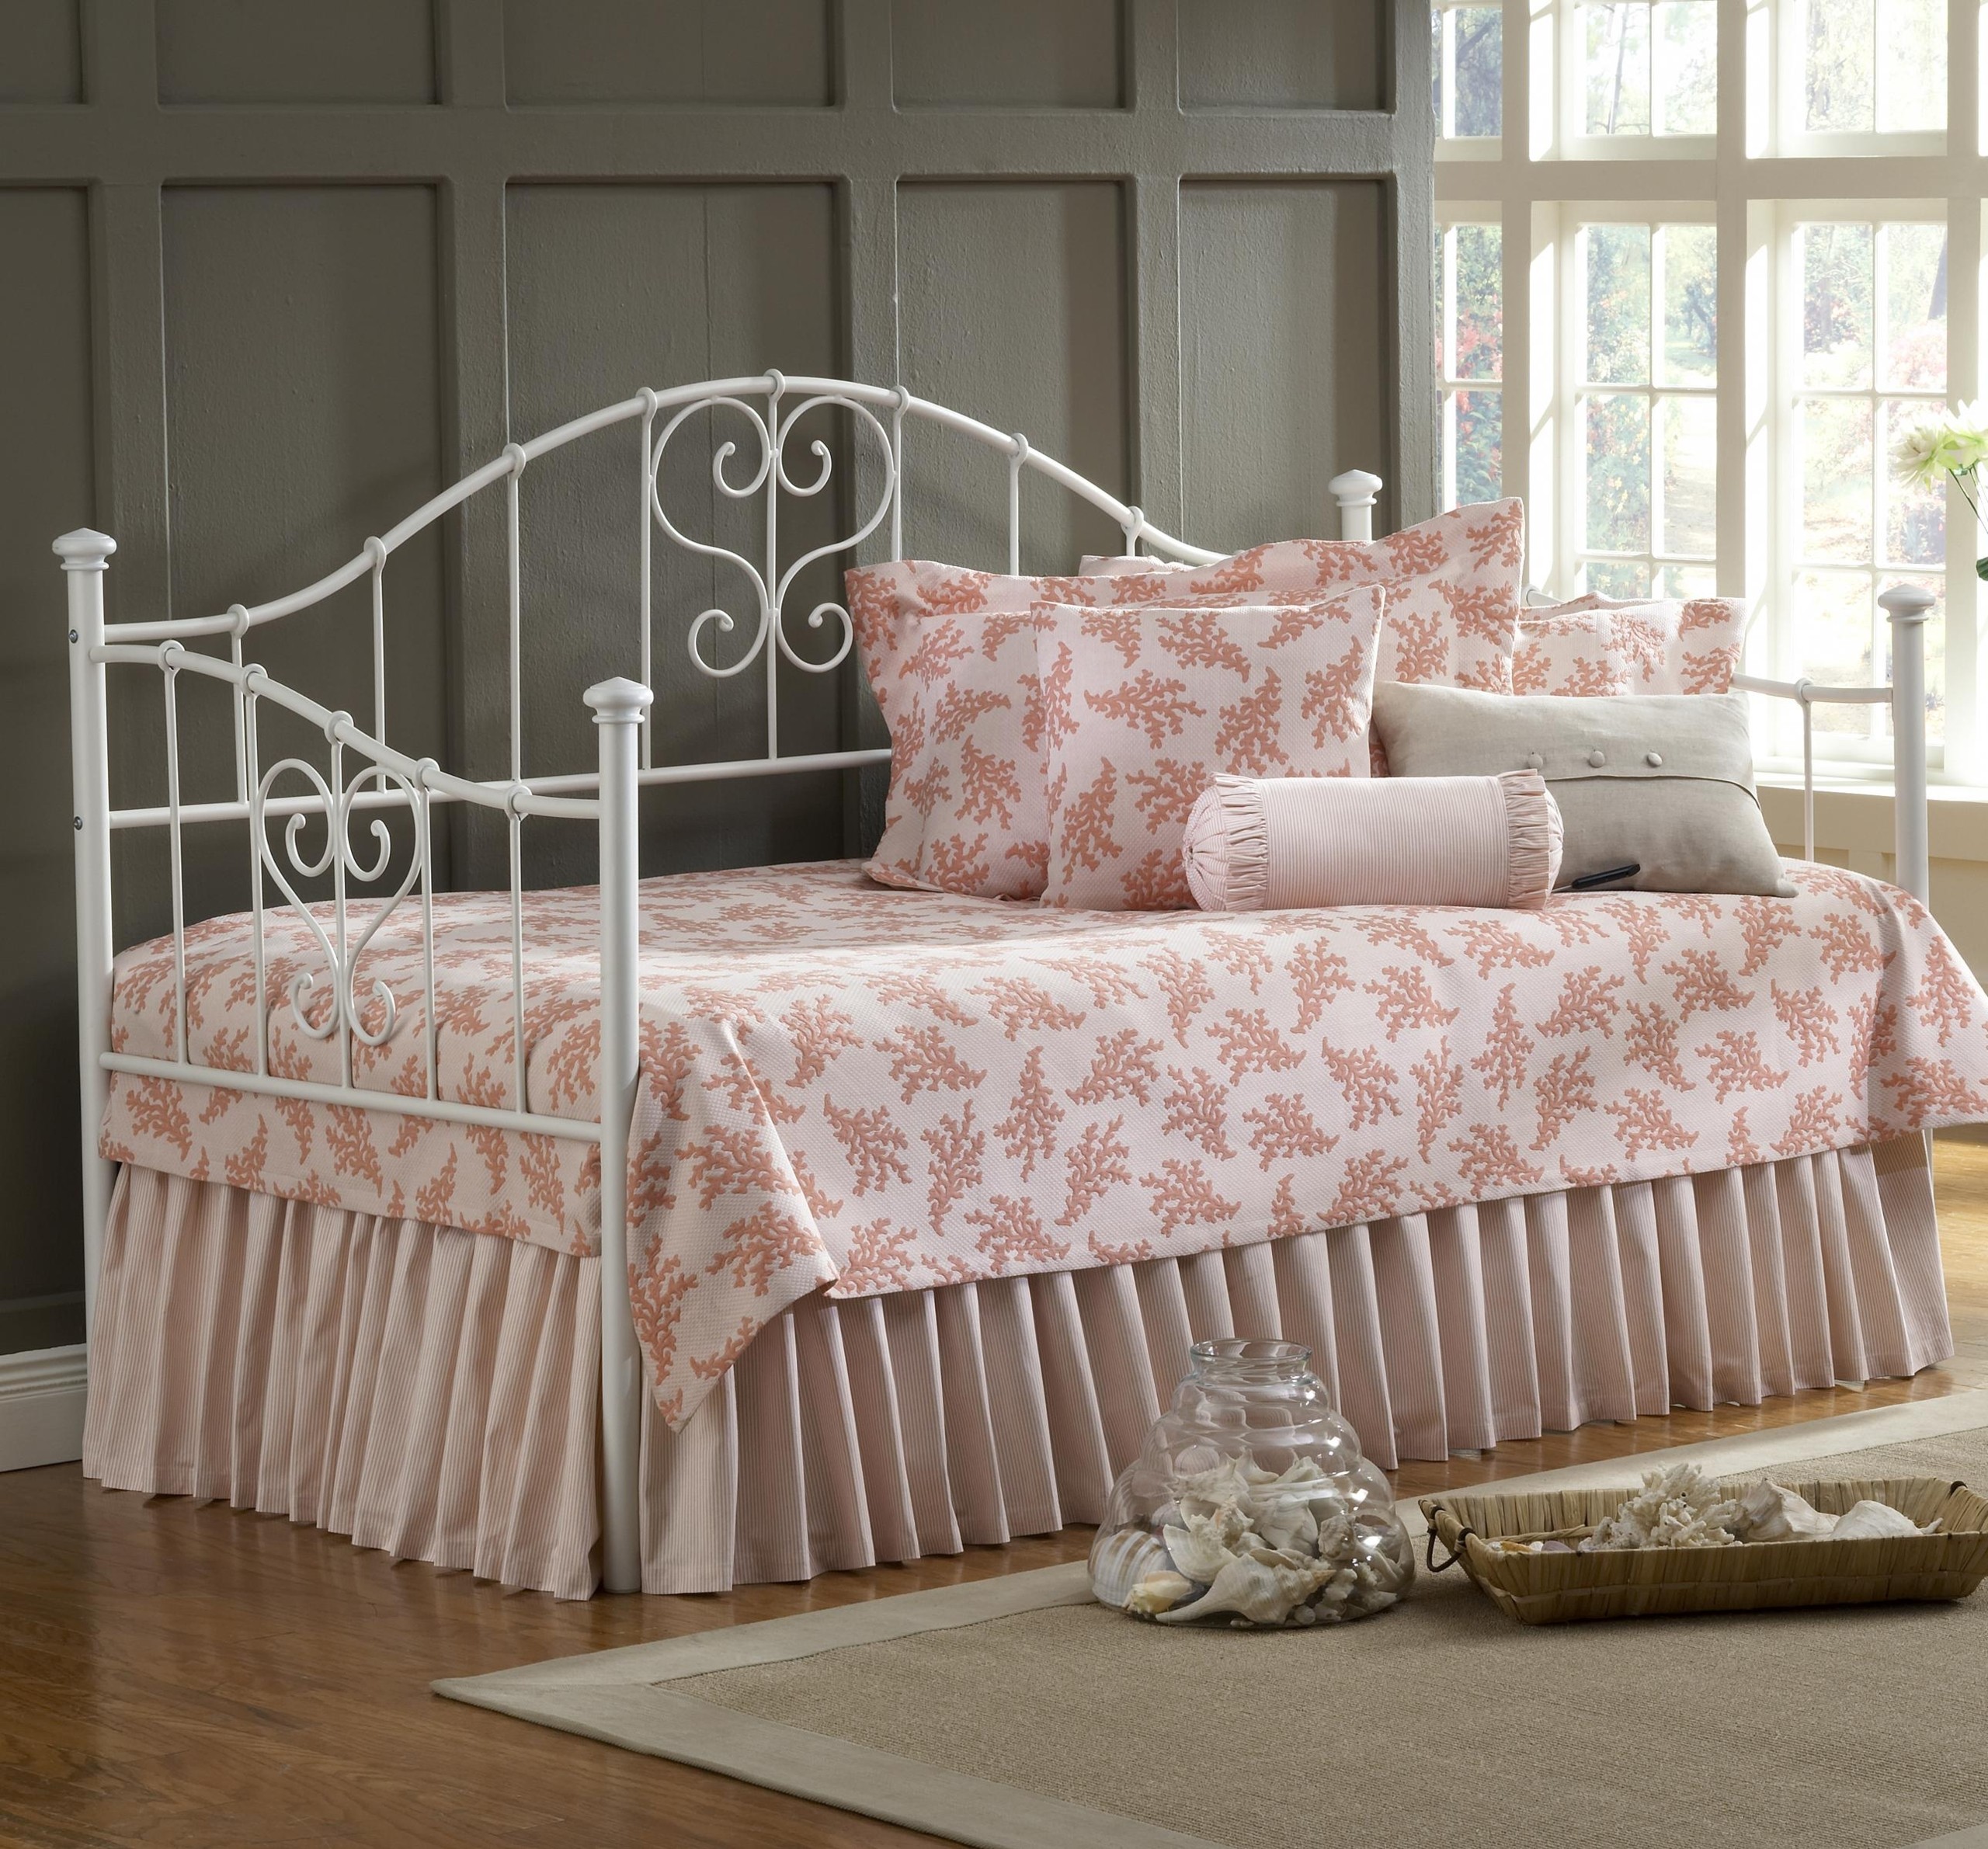 Full size daybed bedding sets hawk haven 3